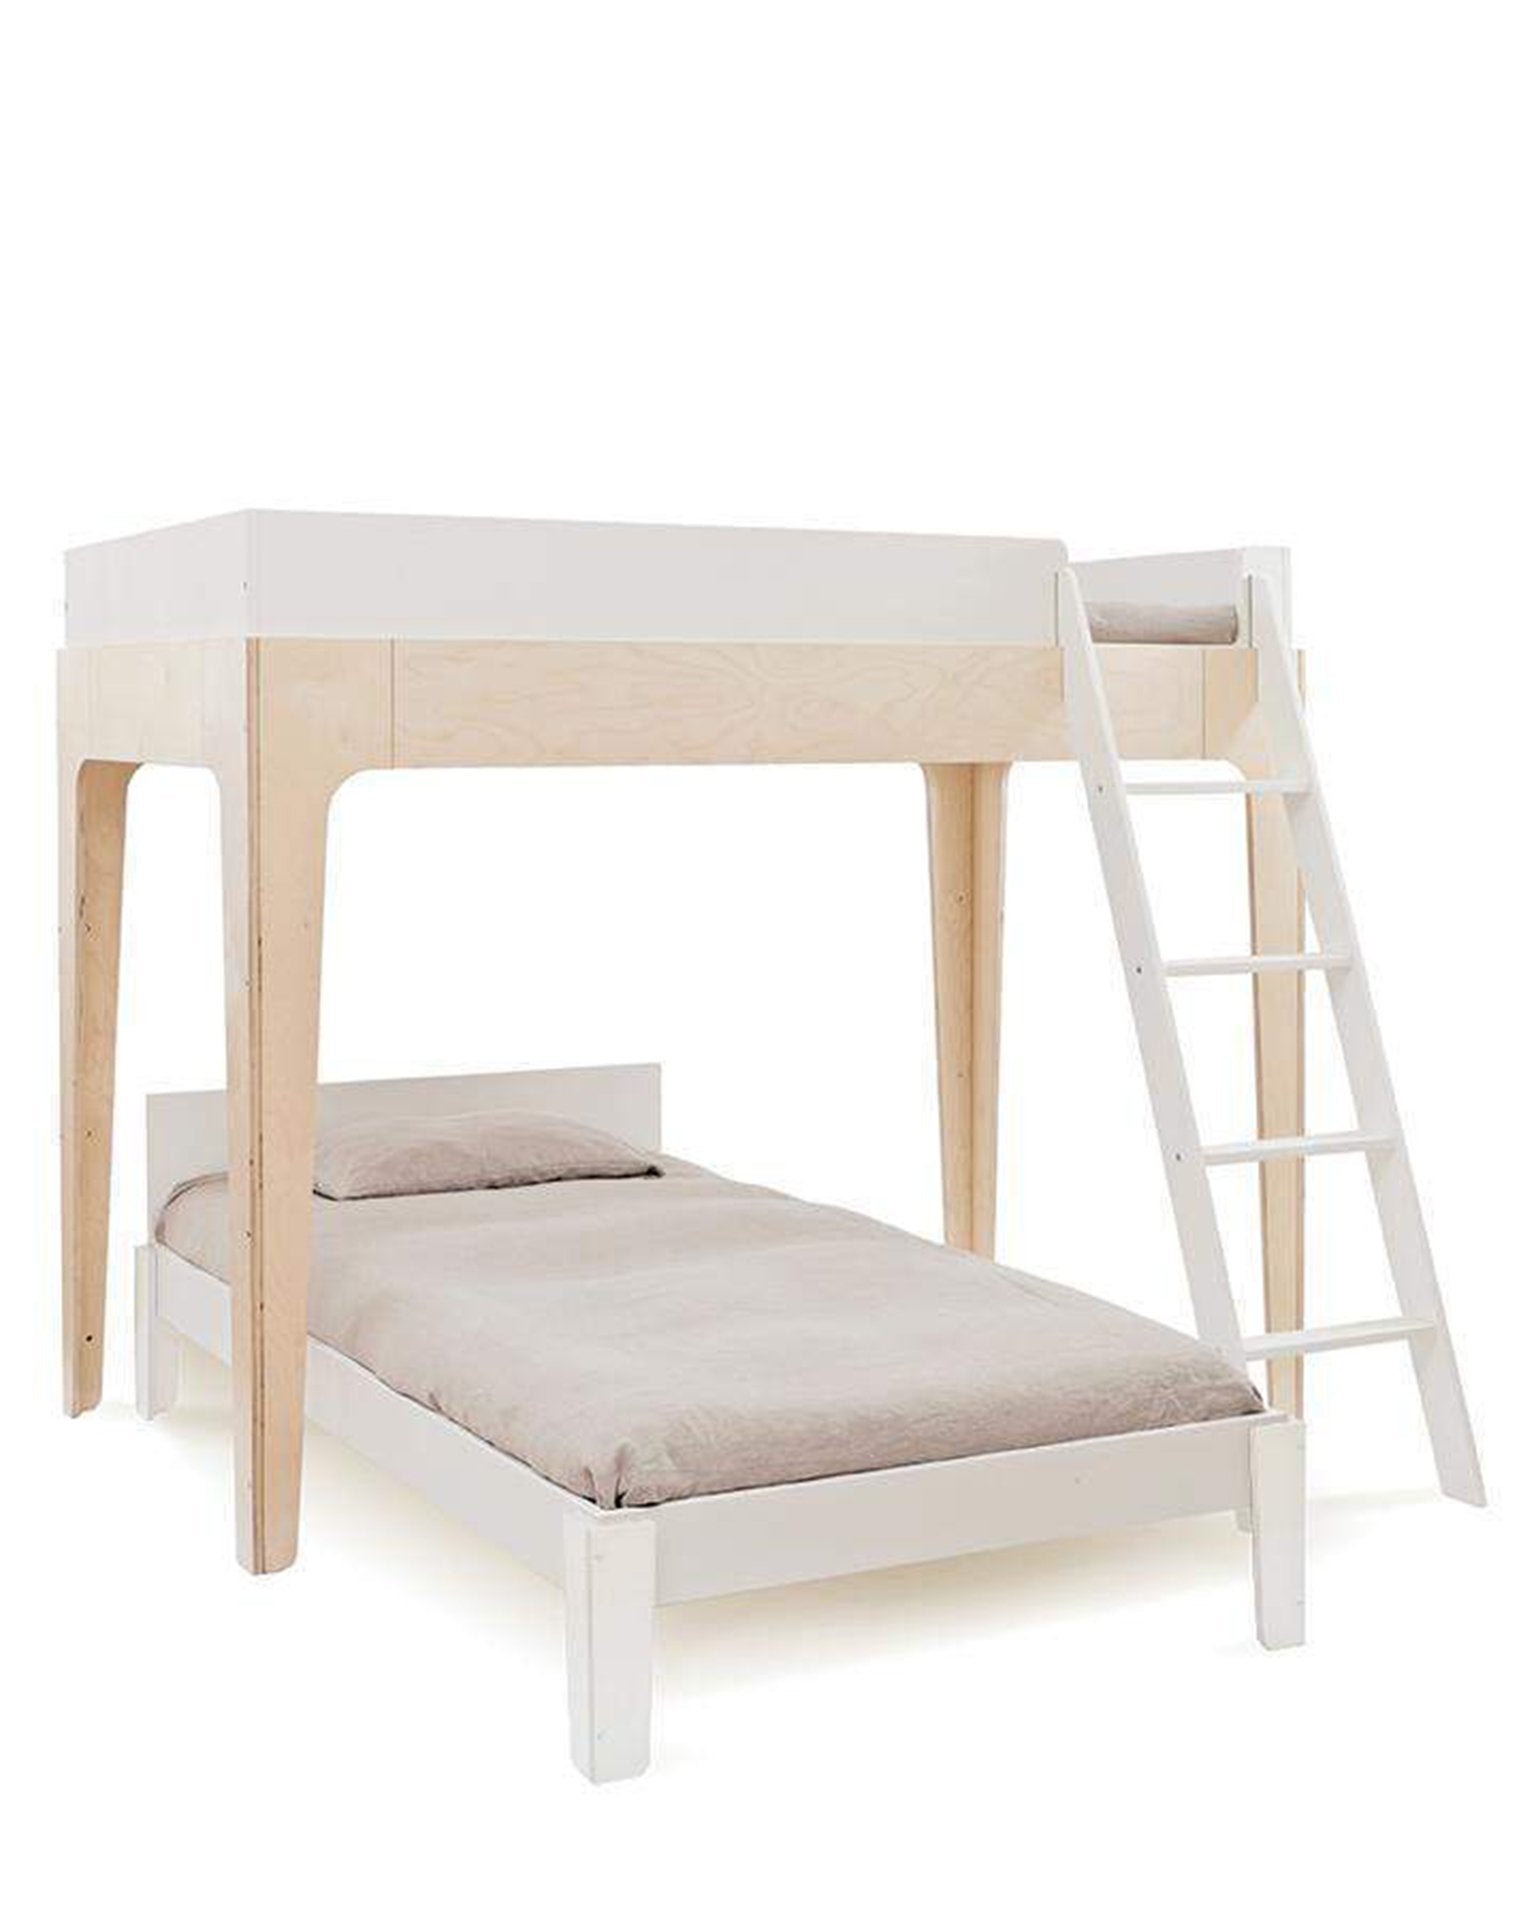 Little oeuf room perch bunk bed in birch